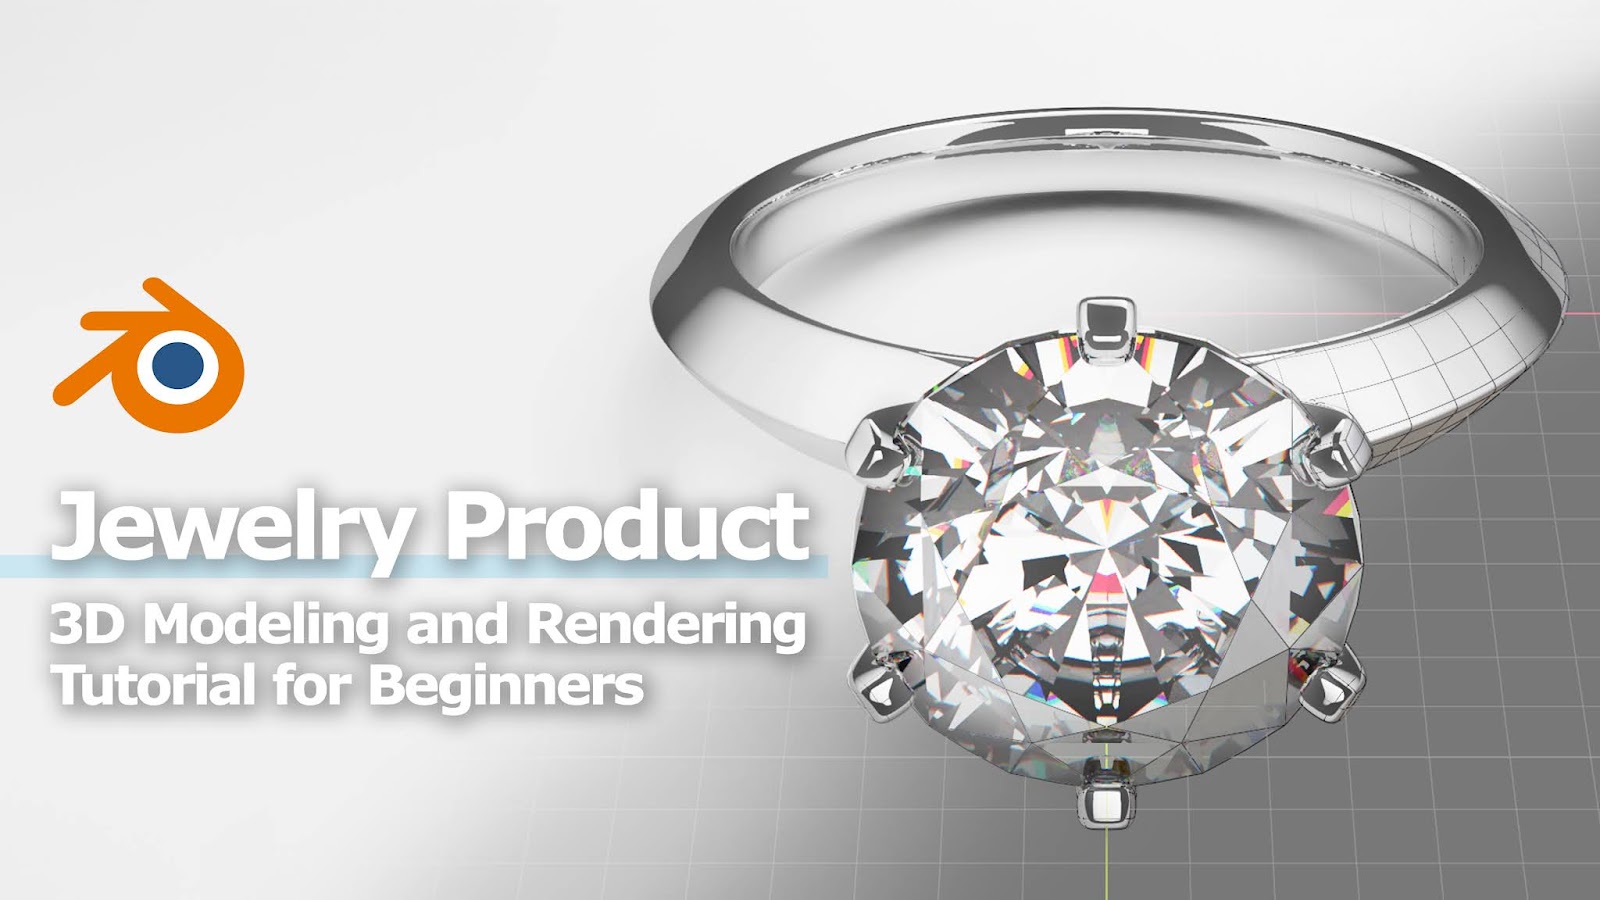 How to make Jewelry Product 3D Modeling and Rendering - Blender Tutorial for Beginners